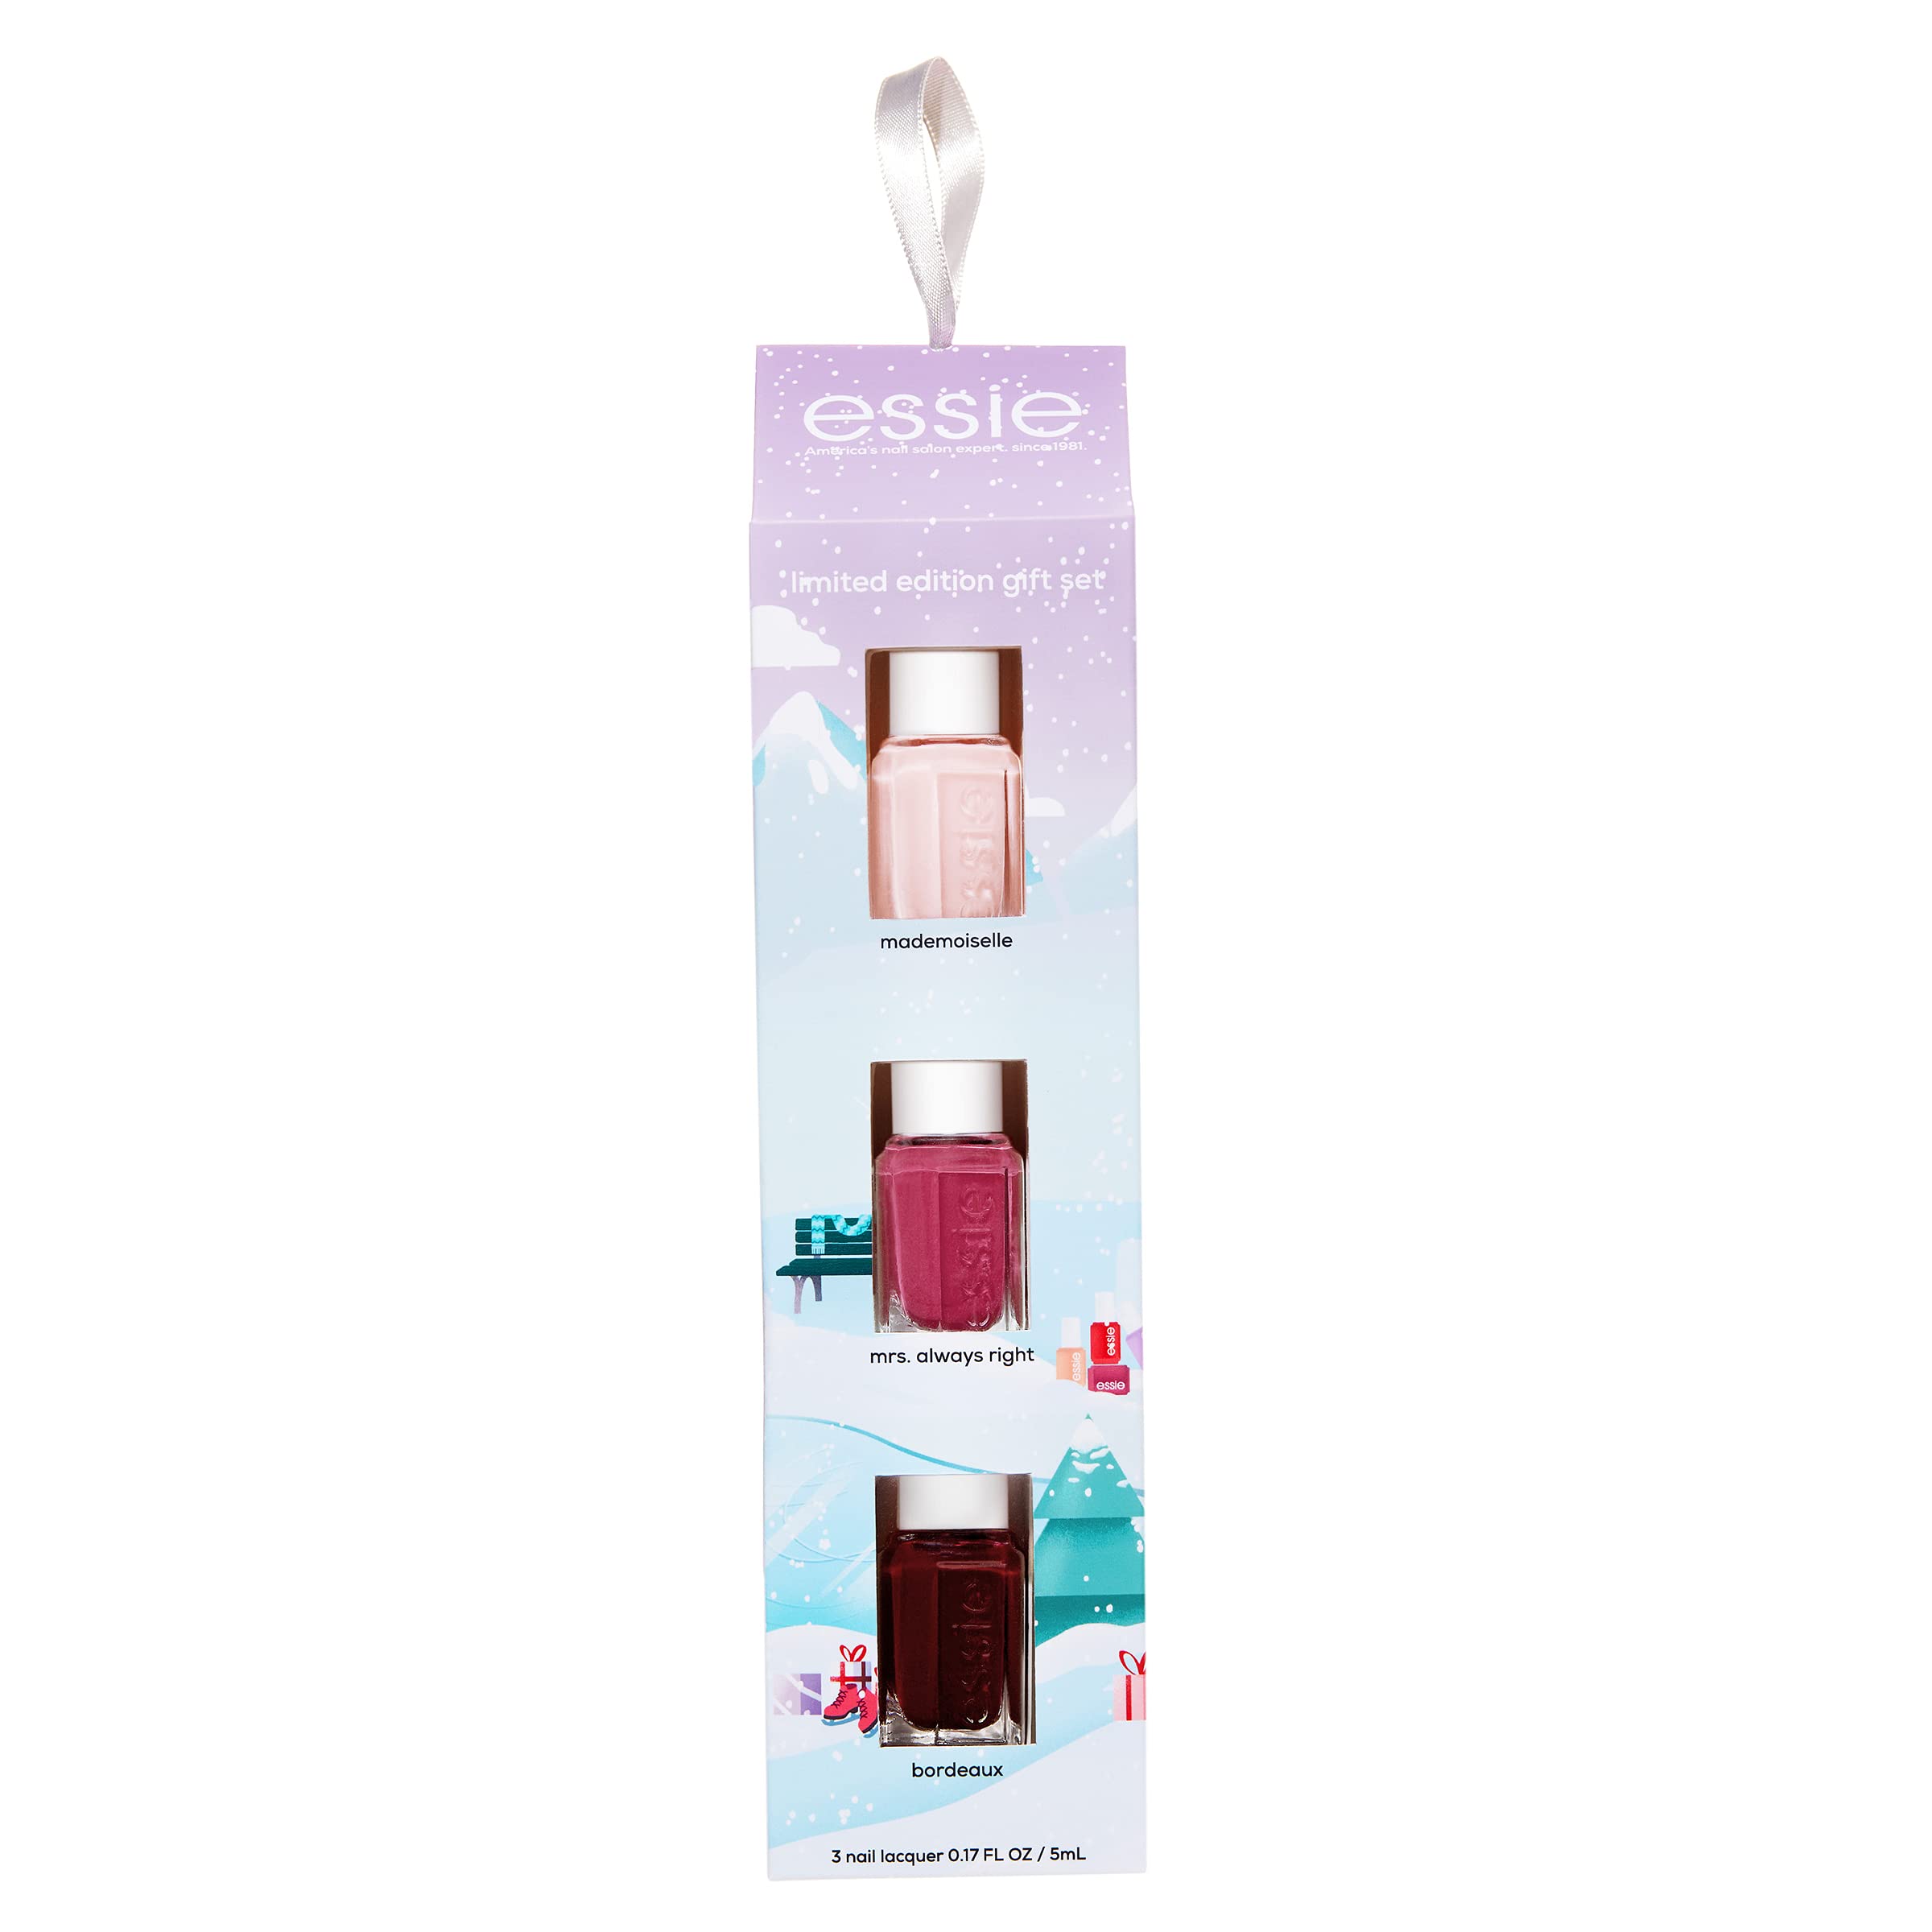 essie New Limited Edition Holiday Mini Gift Set Featuring Nail Color Best  Sellers Mrs. Always Right Mademoiselle & Bordeaux 1 Kit 3 Piece 3 Count  (Pack of 1)